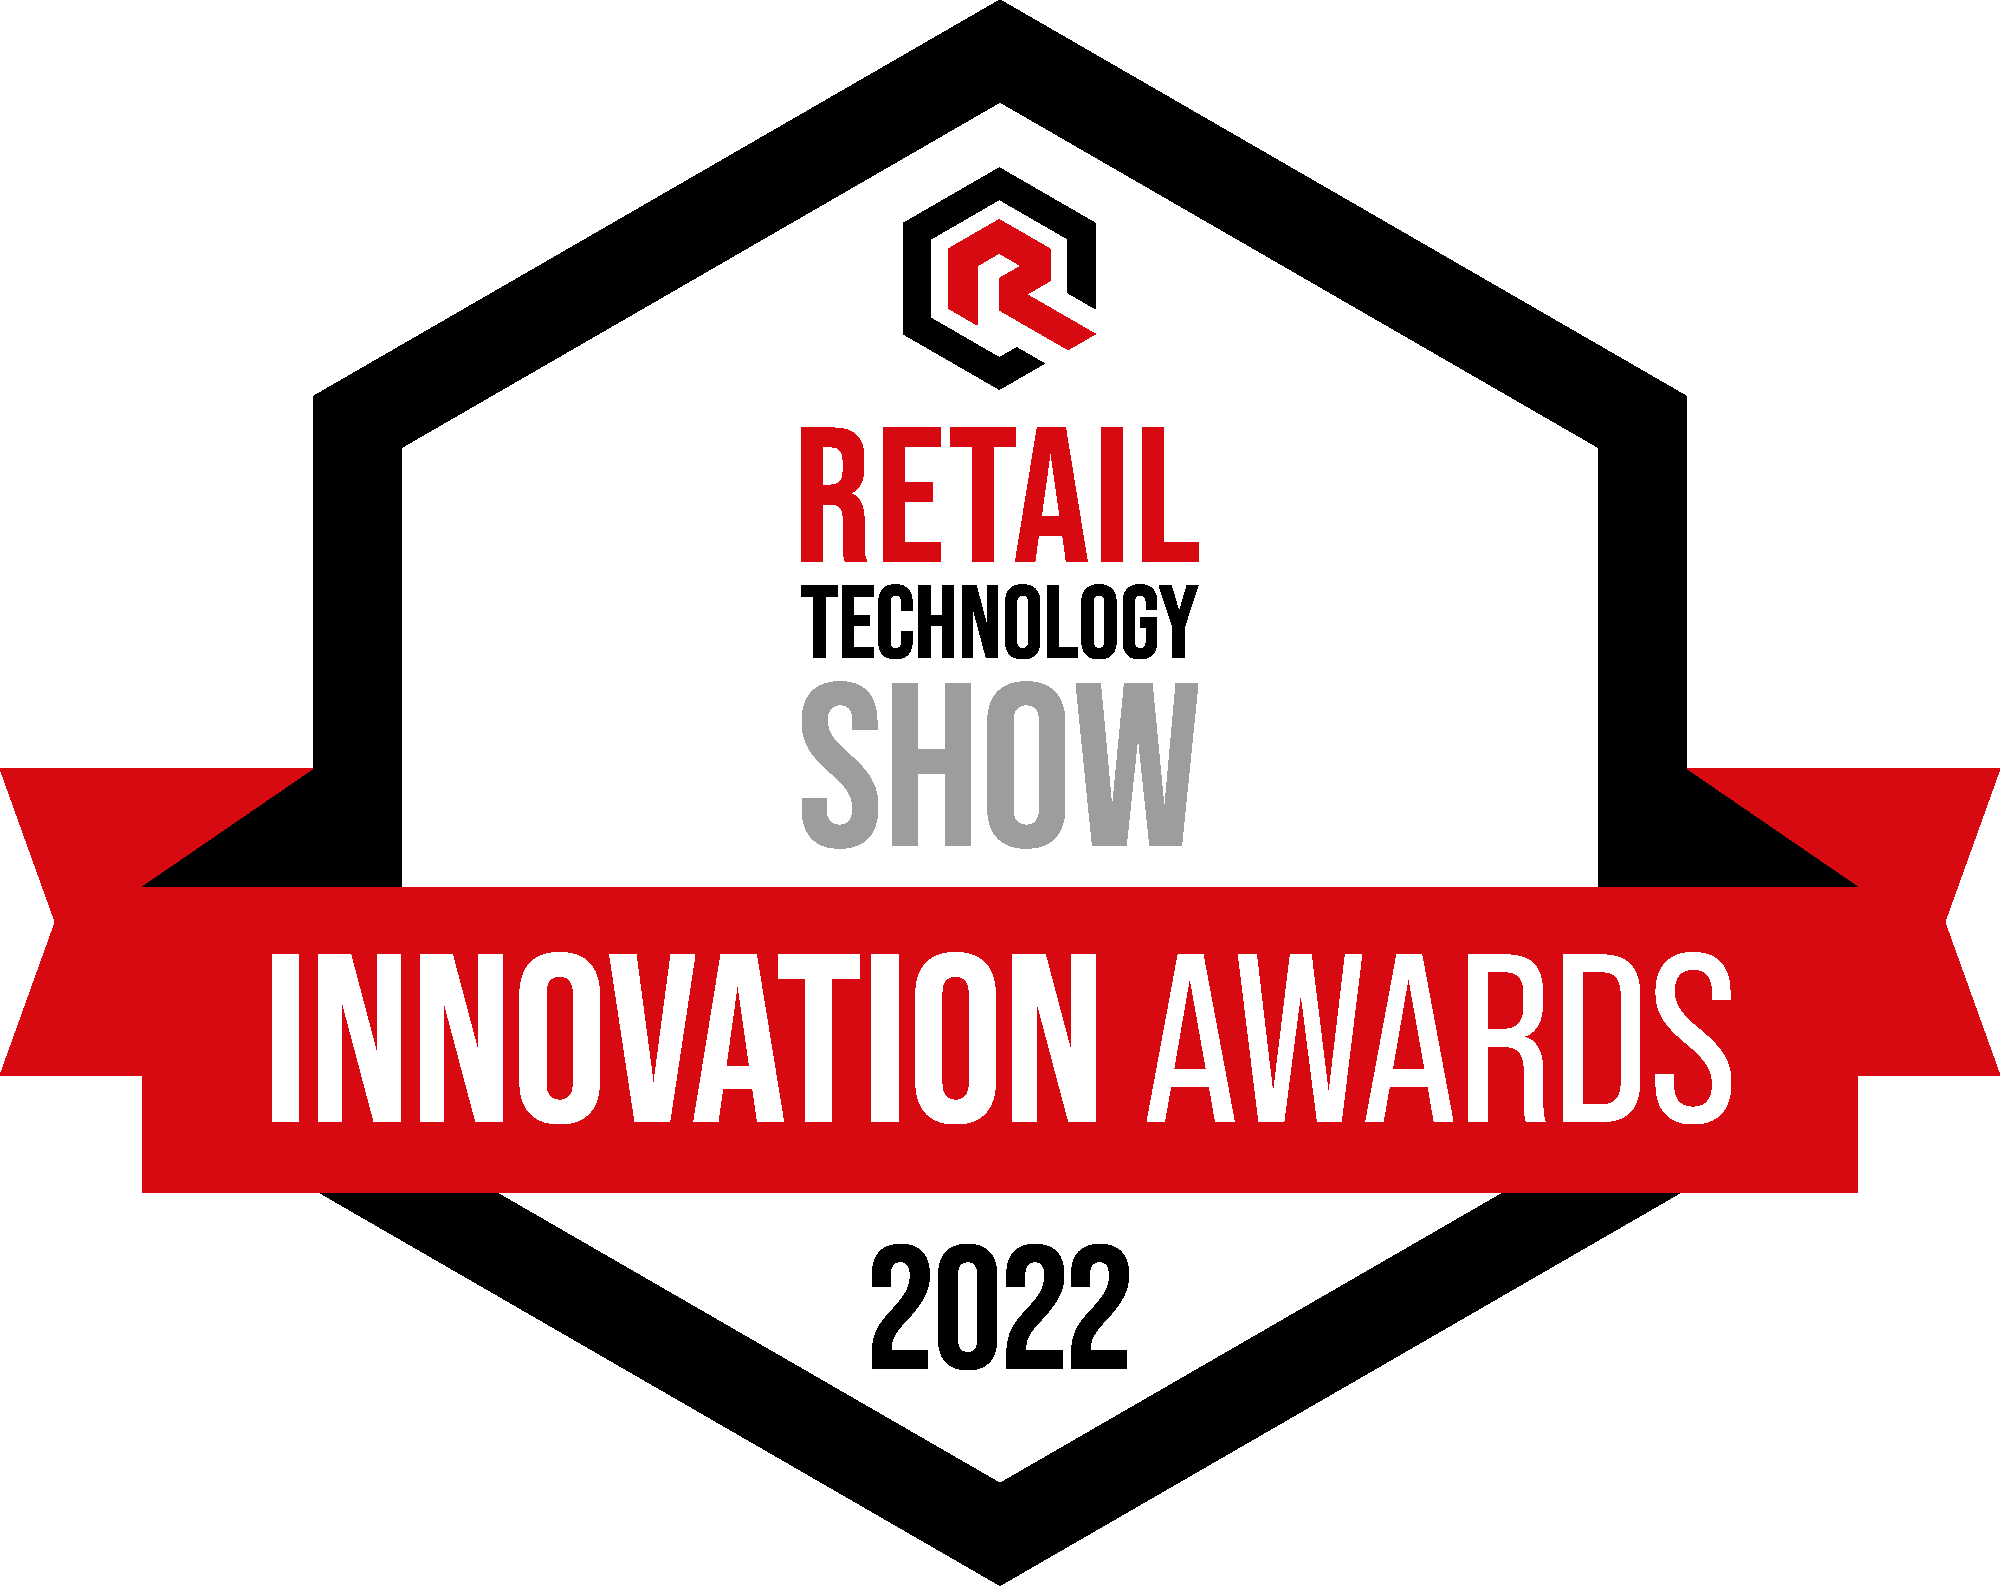 Retail Technology Innovation Awards 2022 Retail Technology Show